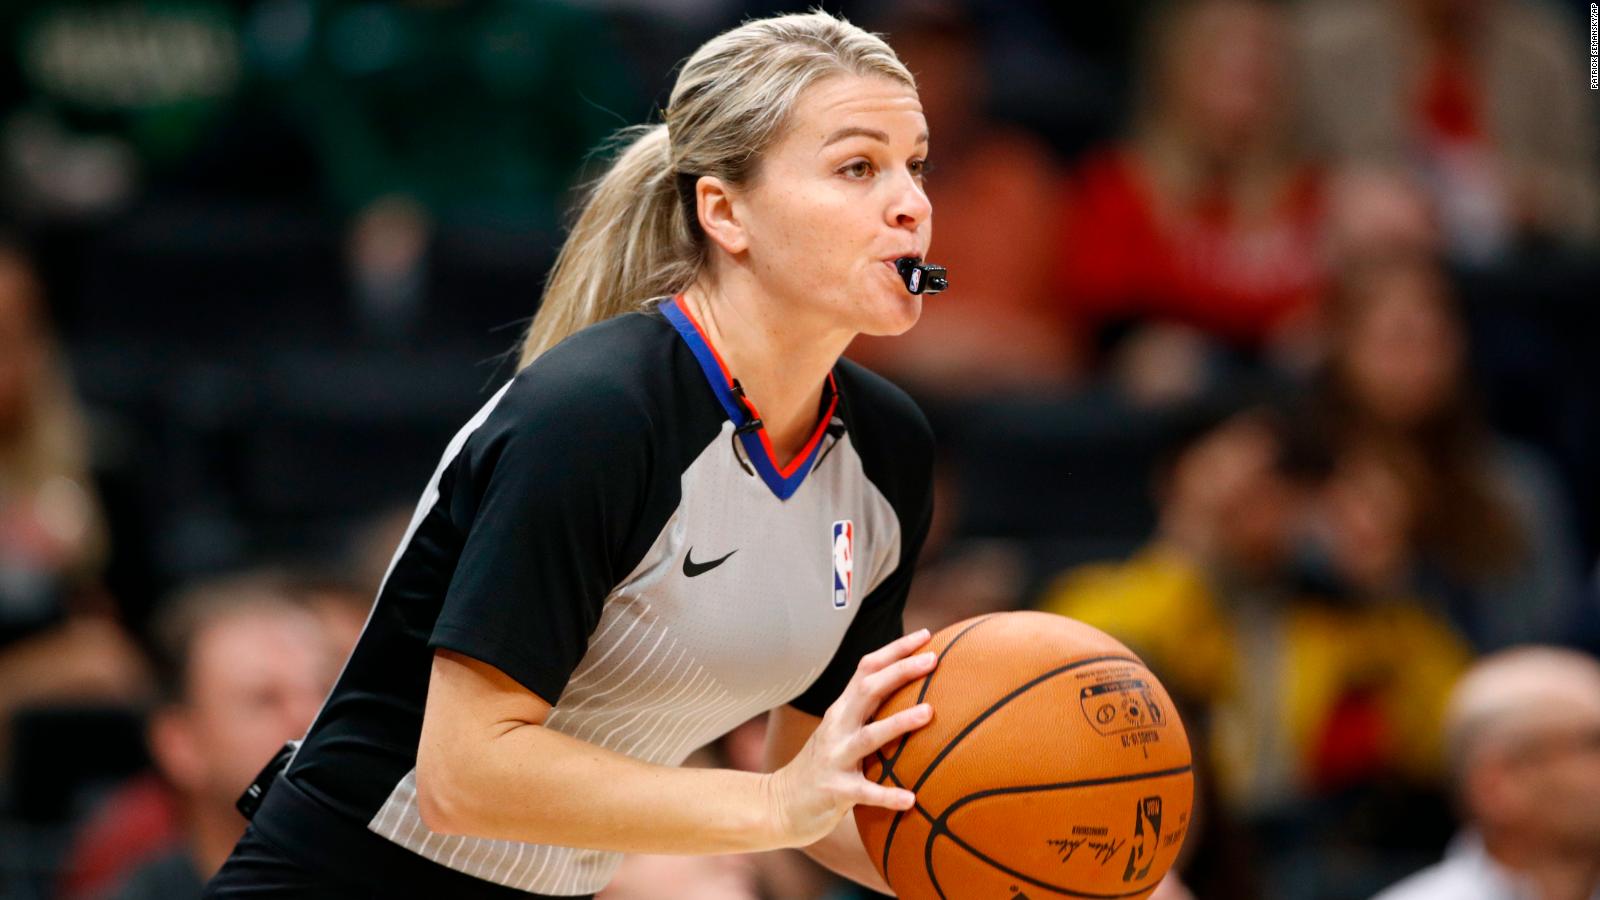 The NBA has been around for more than 70 years. It’s only now getting its 6th female referee